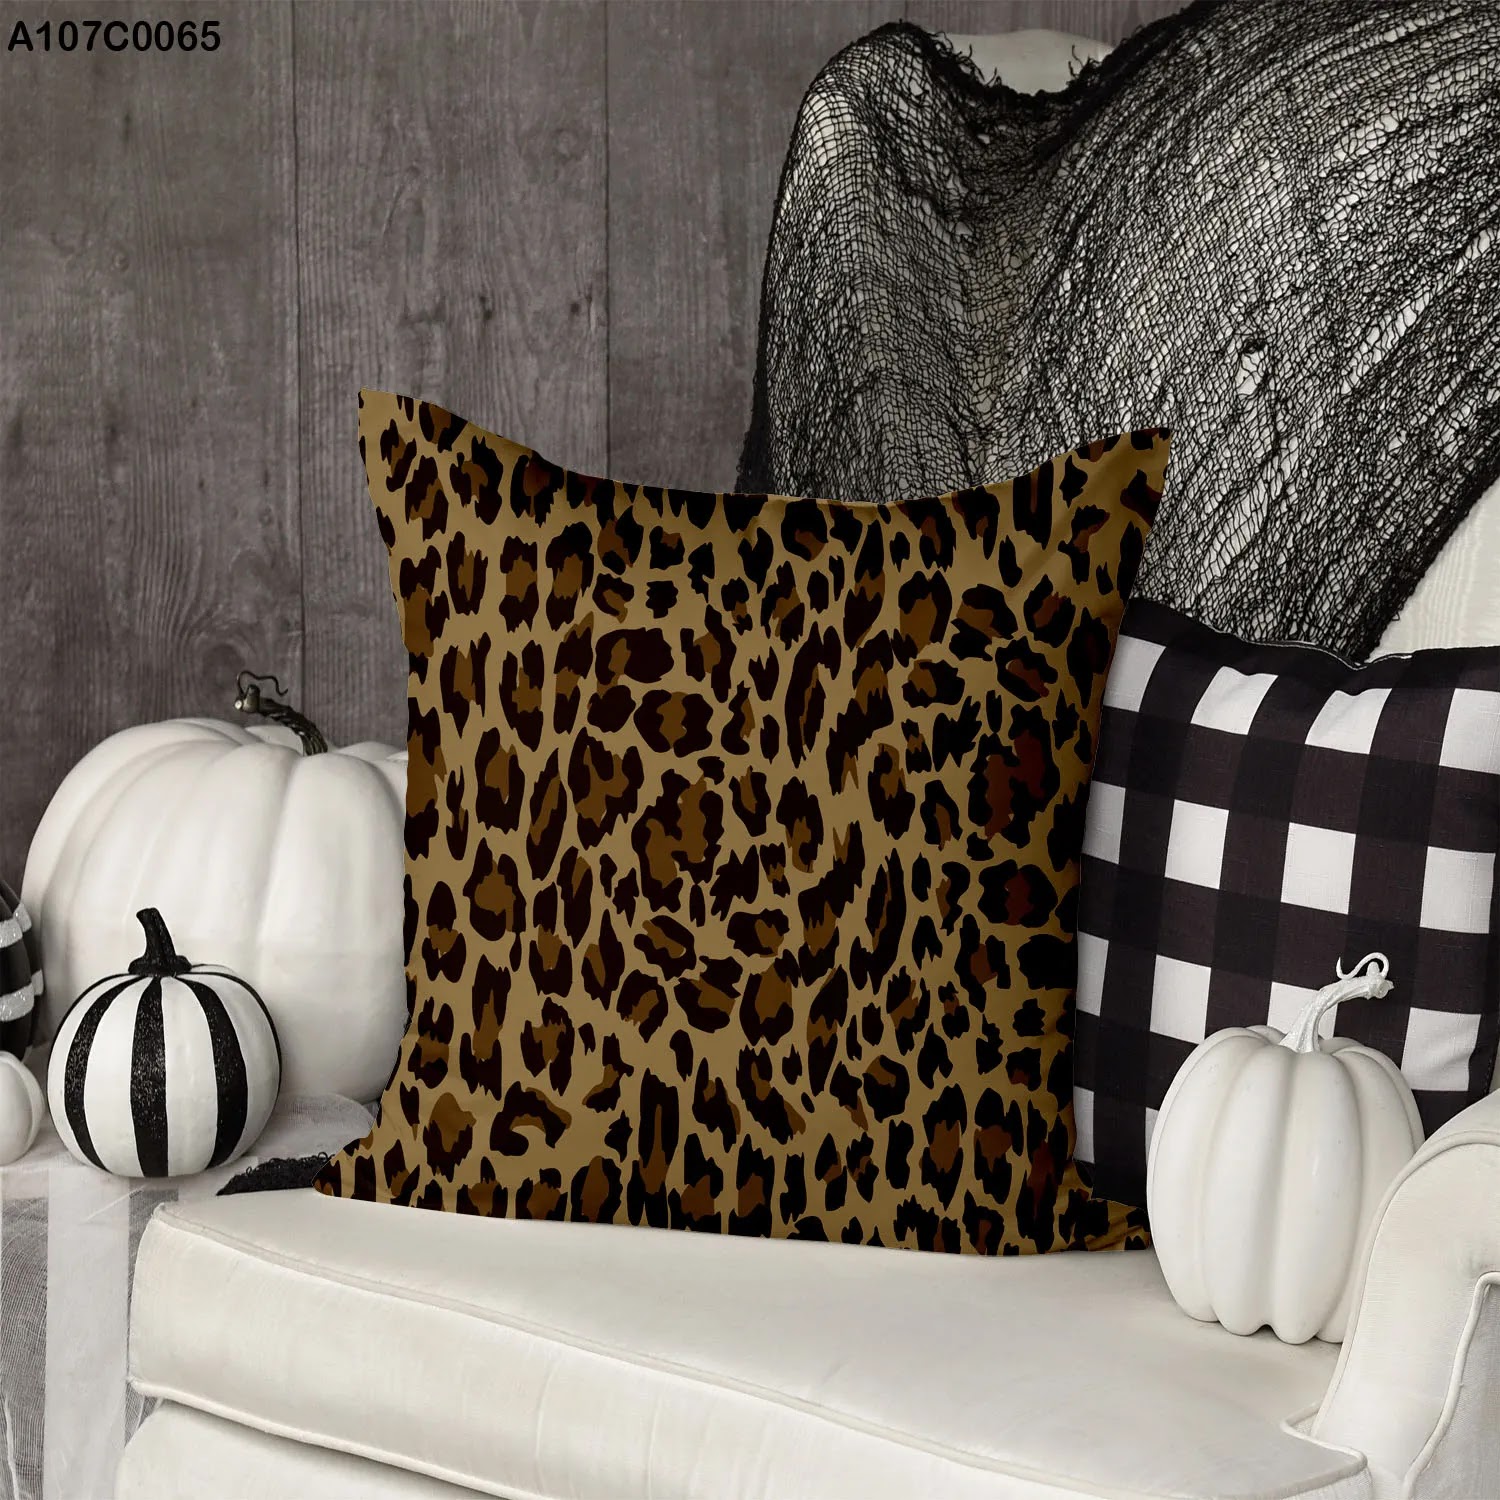 Pillow case with small brown Leopard skin pattern